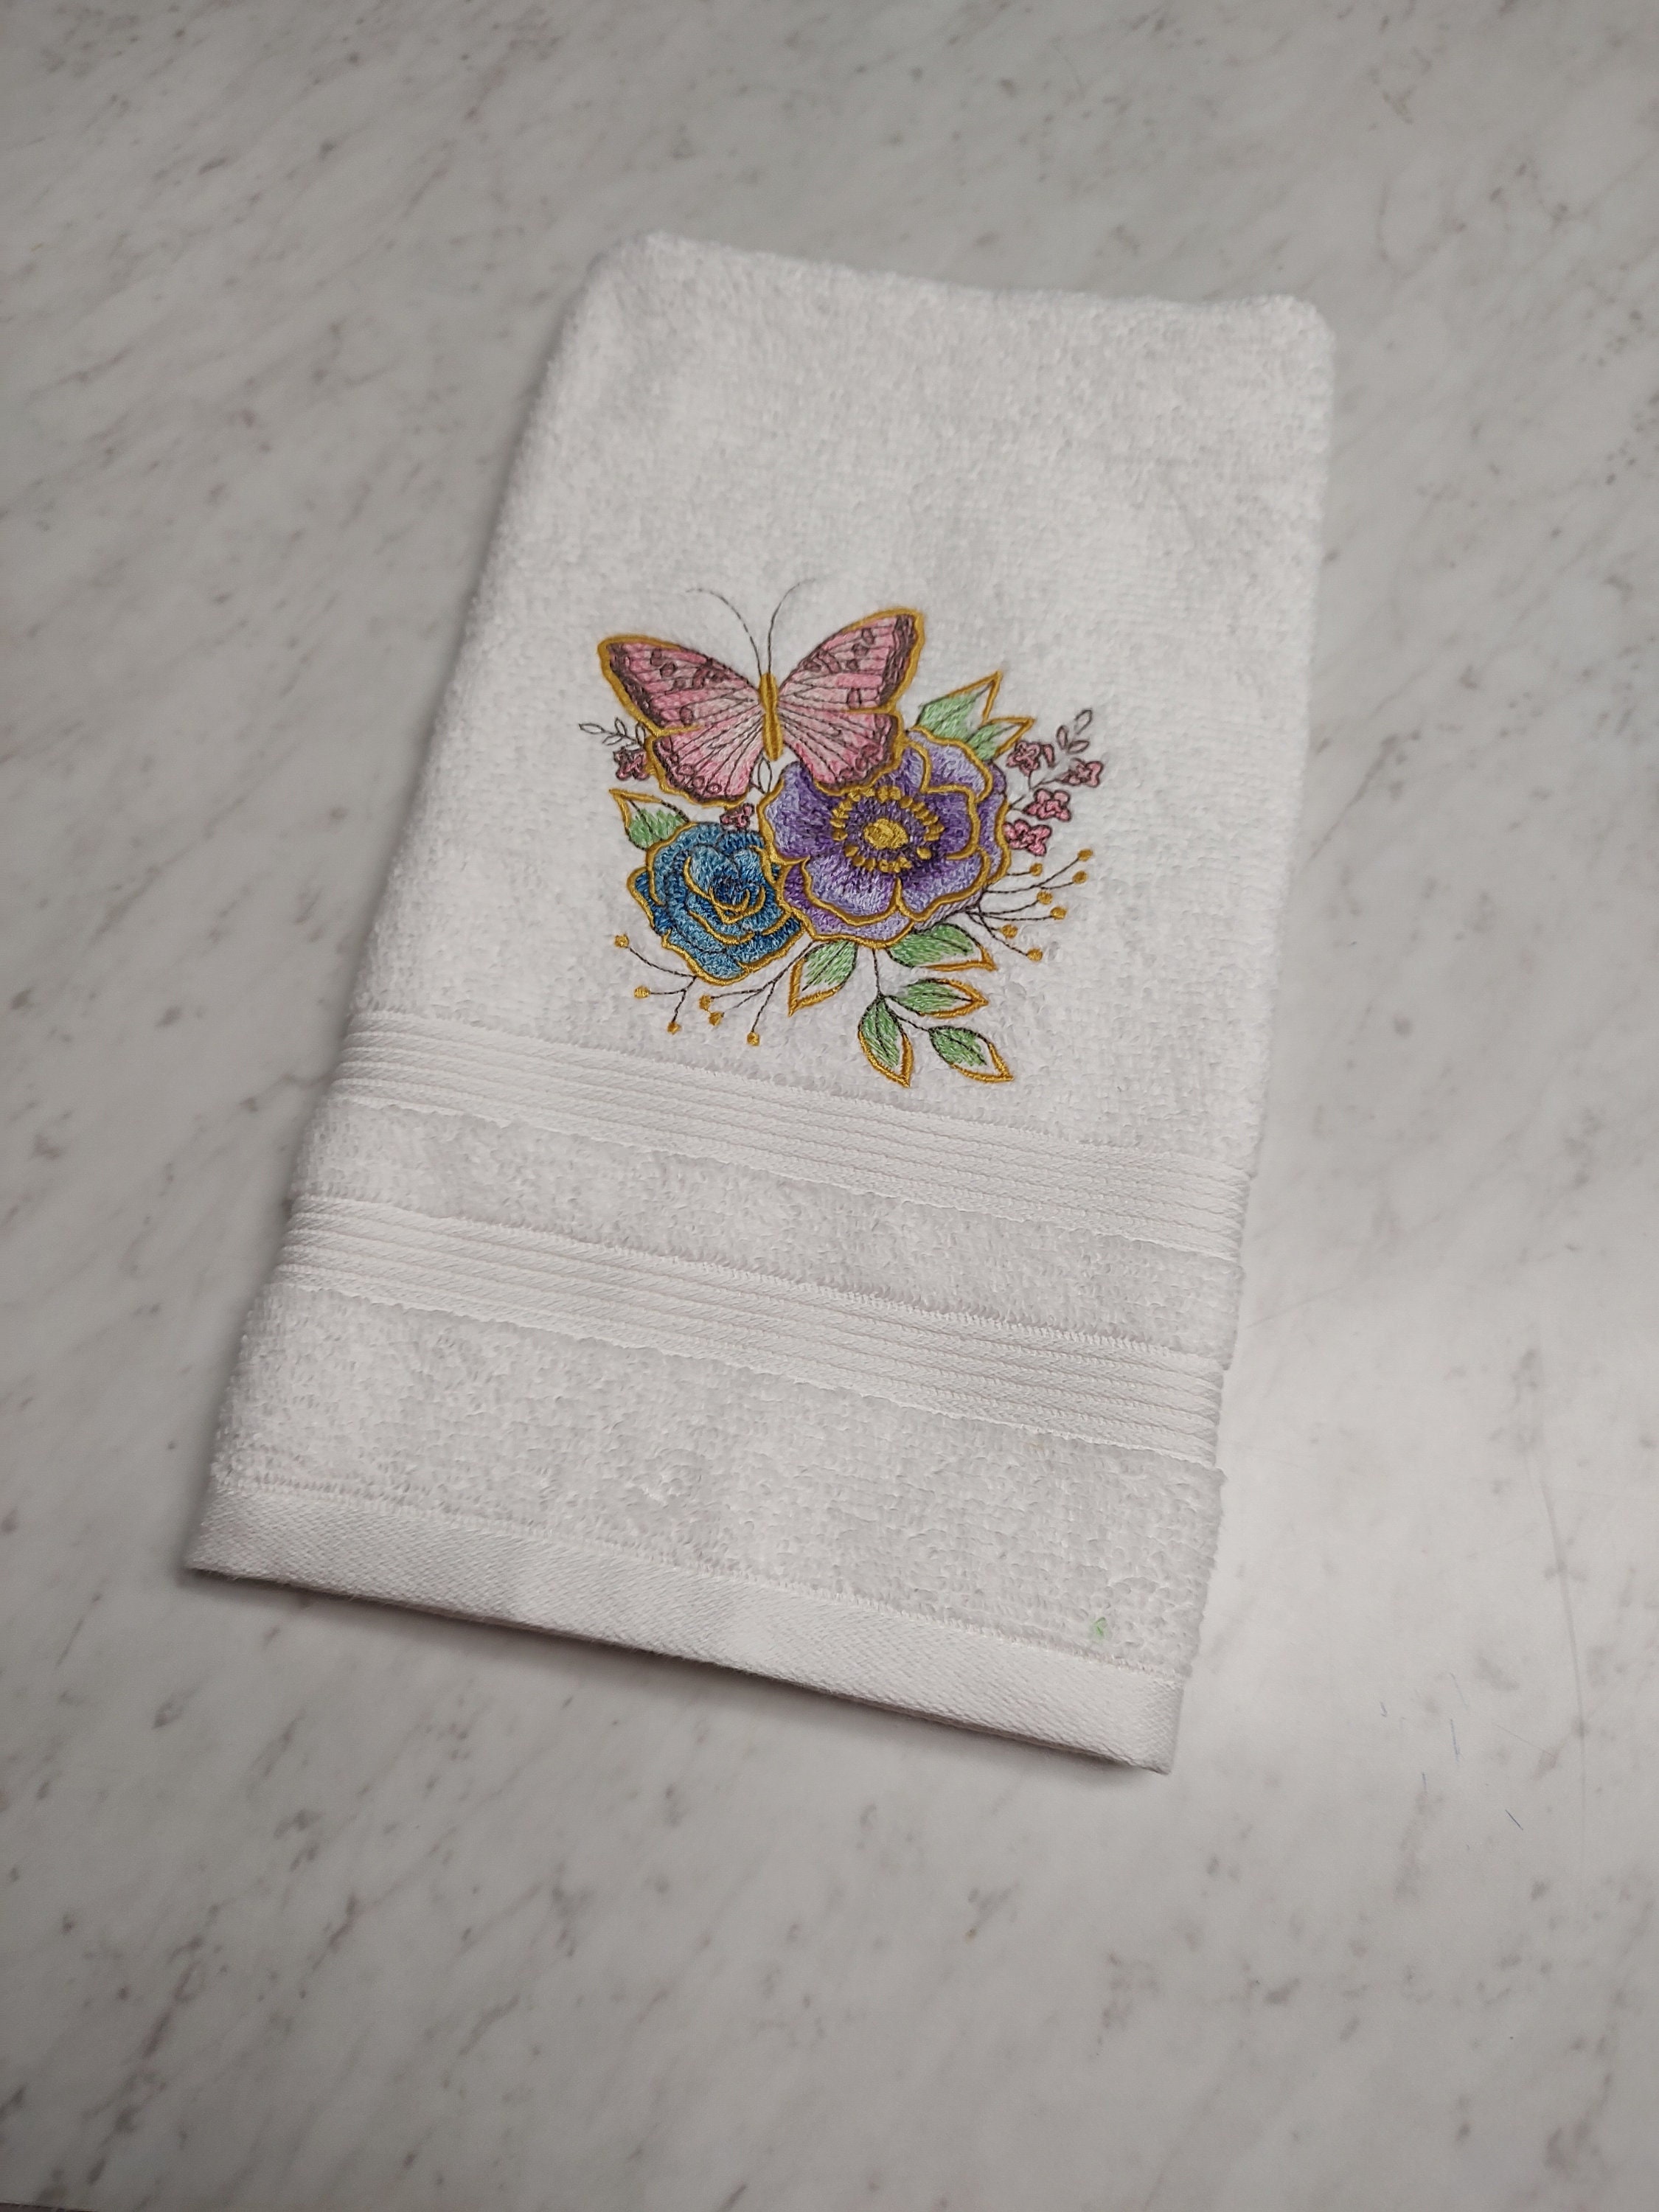 Embroidered Butterflies, Embroidered Hand Towels, Bathroom Decor, White Hand  Towel, Springtime Decor, Cute Hand Towel, READY TO SHIP 